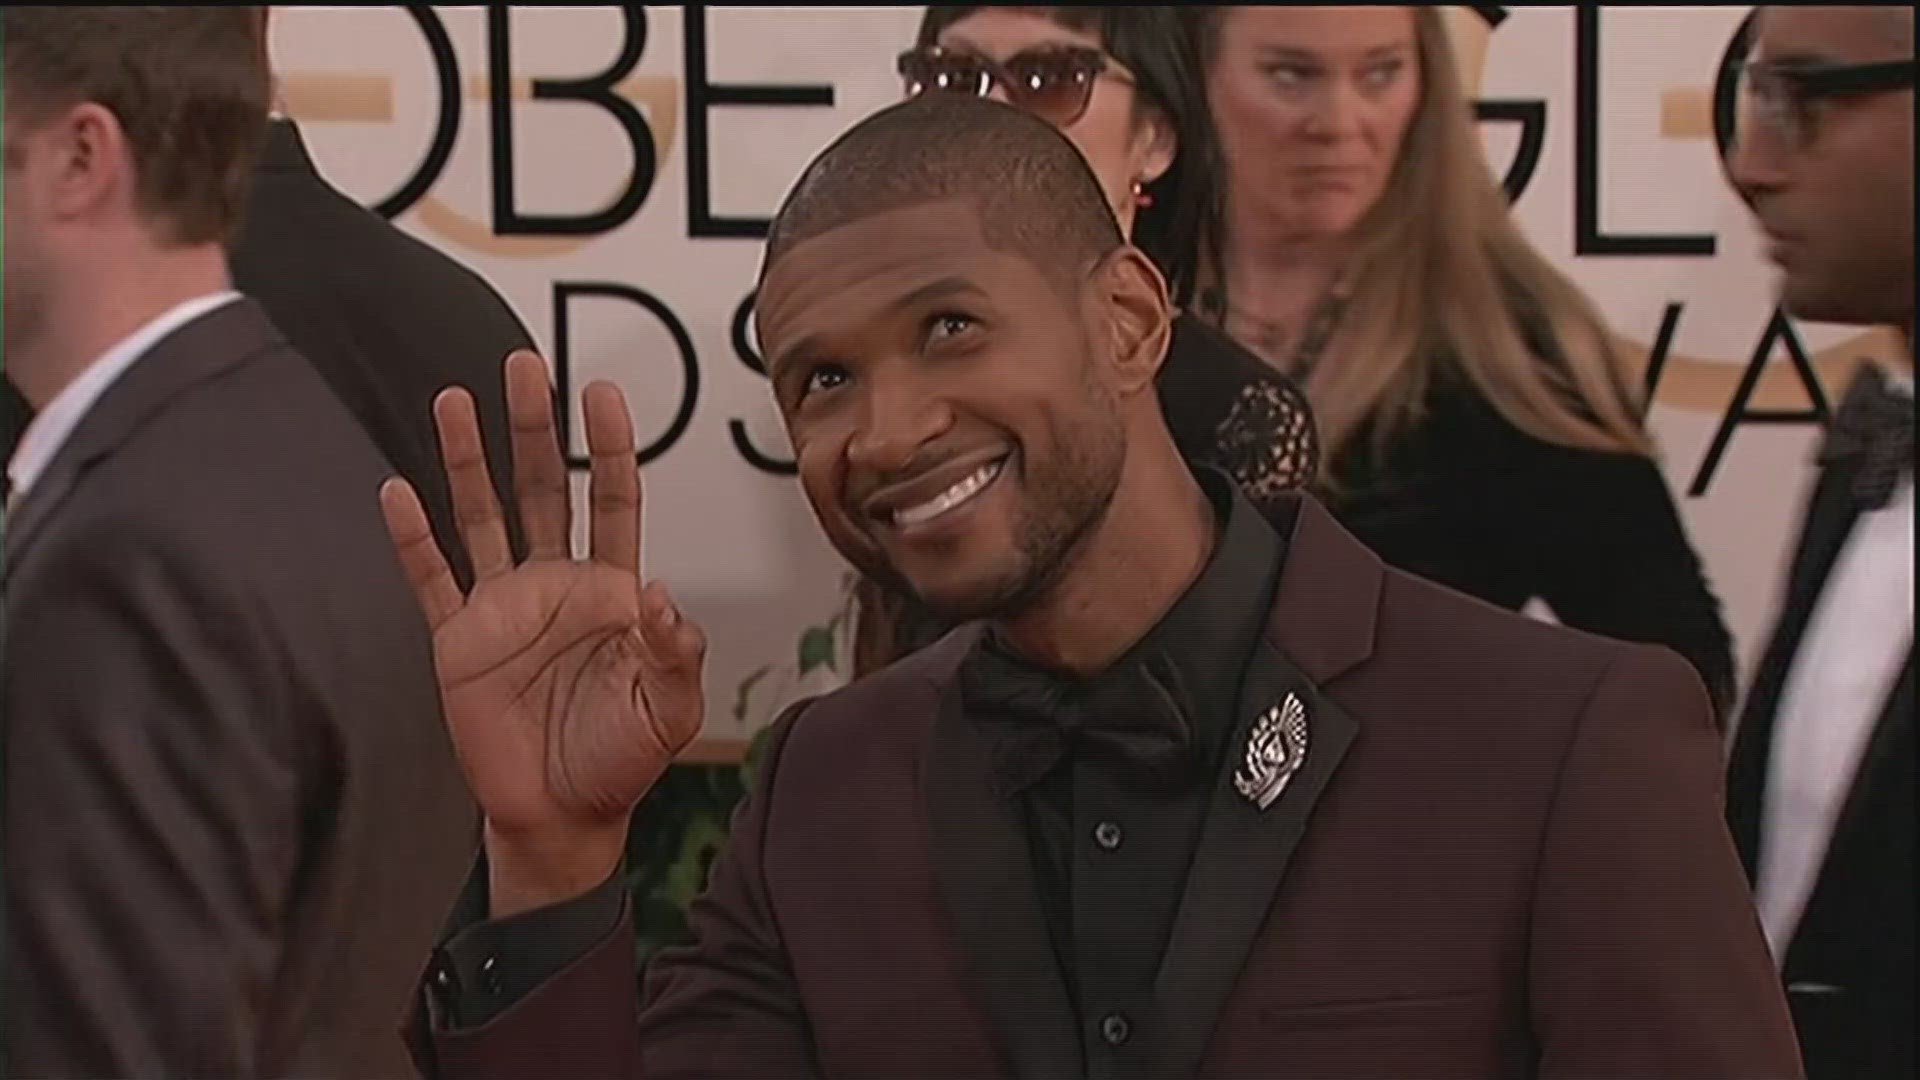 Turns out, two shows at State Farm Arena won't be enough for Usher.